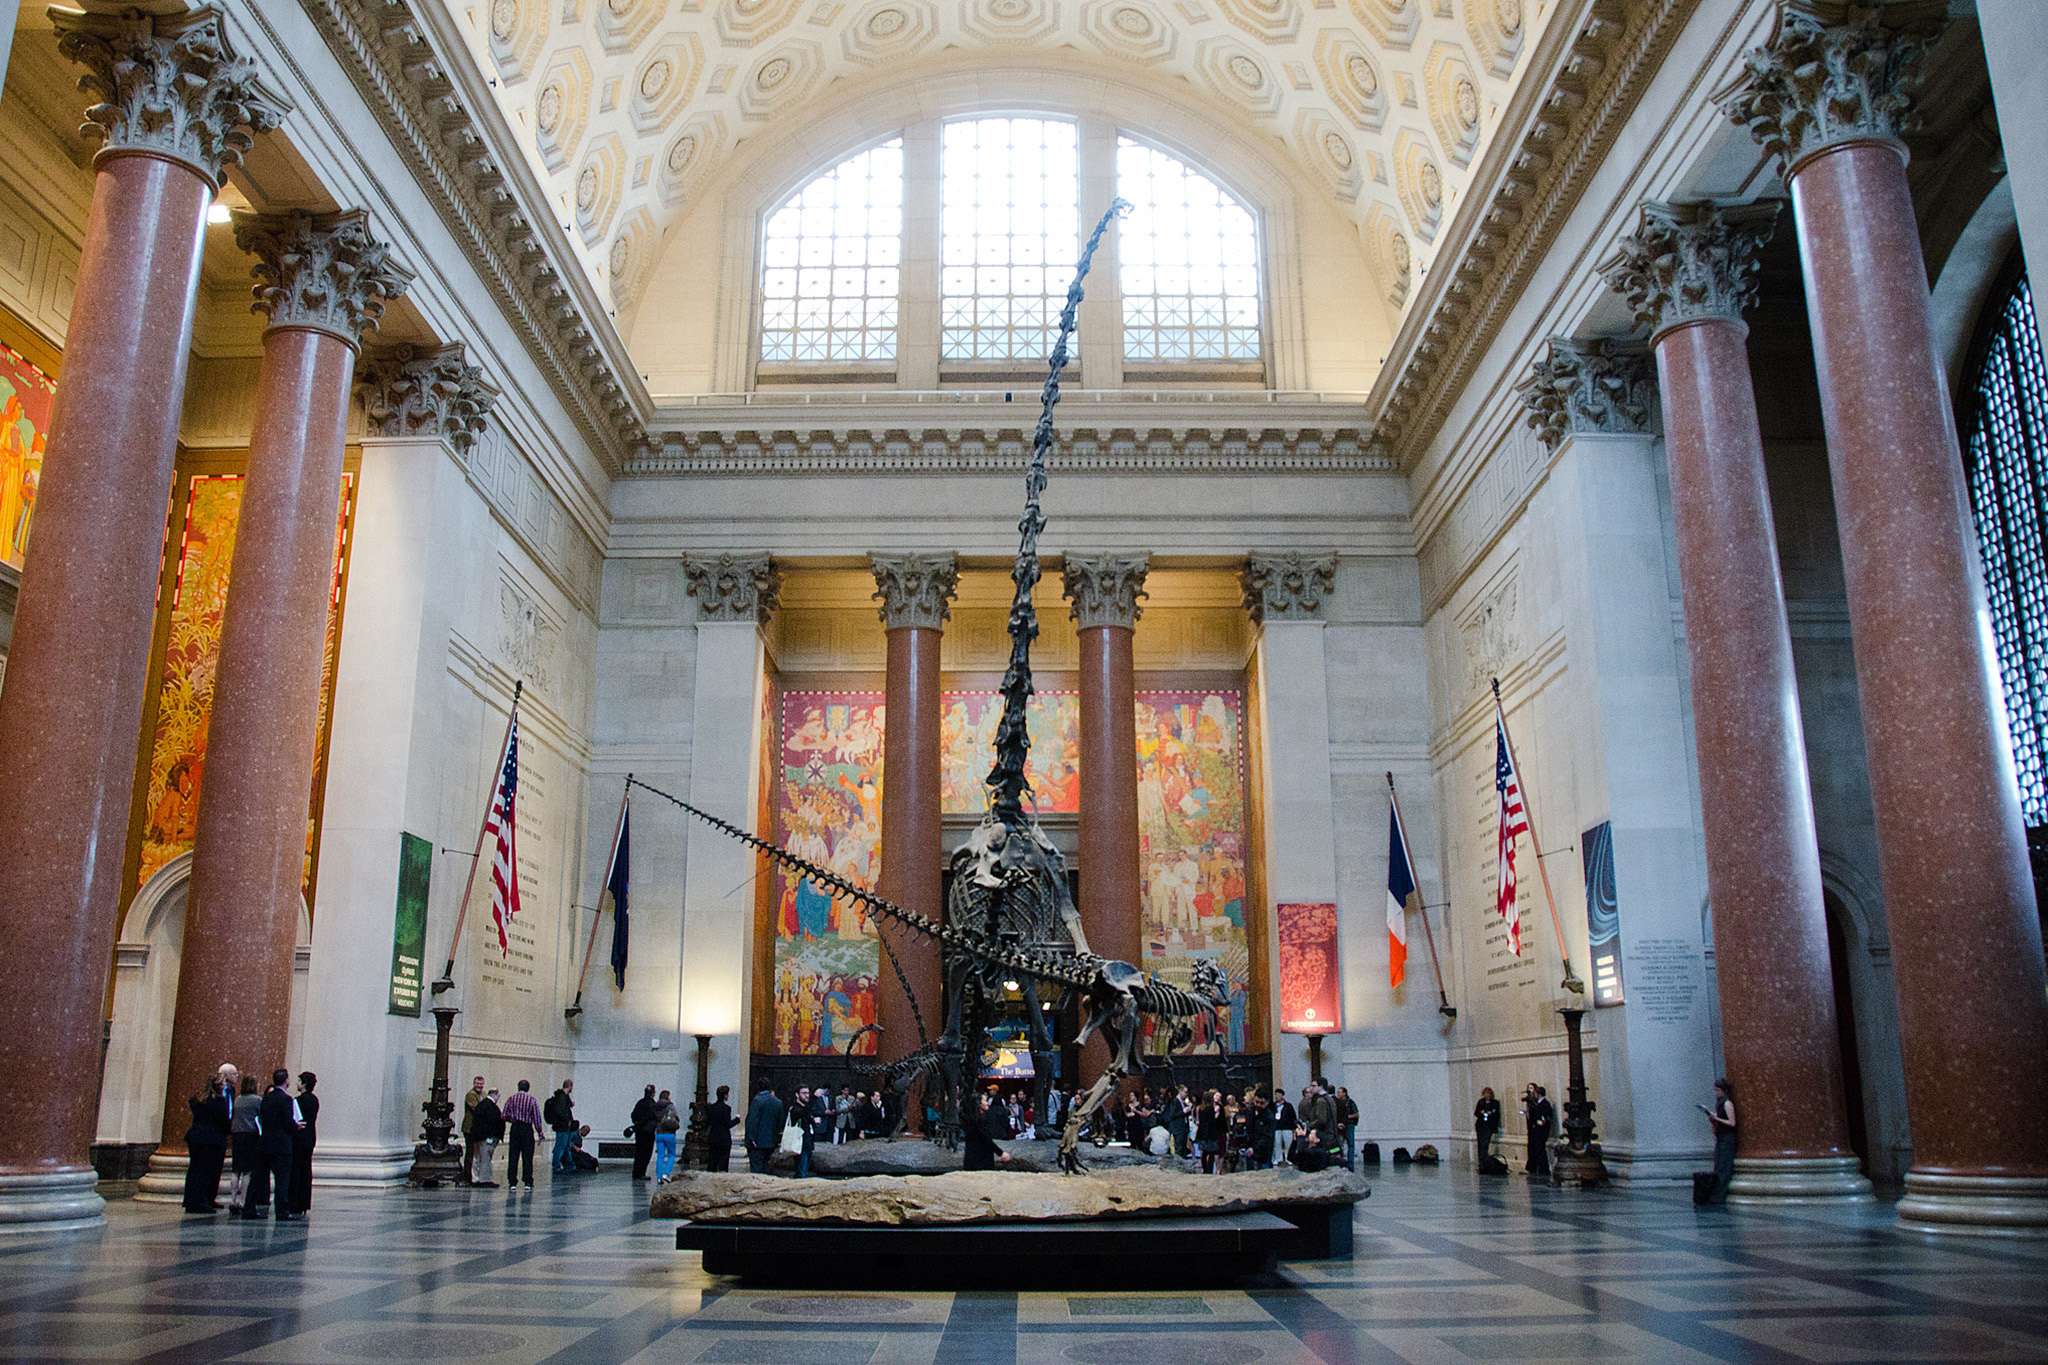 New York attractions: The American Museum of Natural History